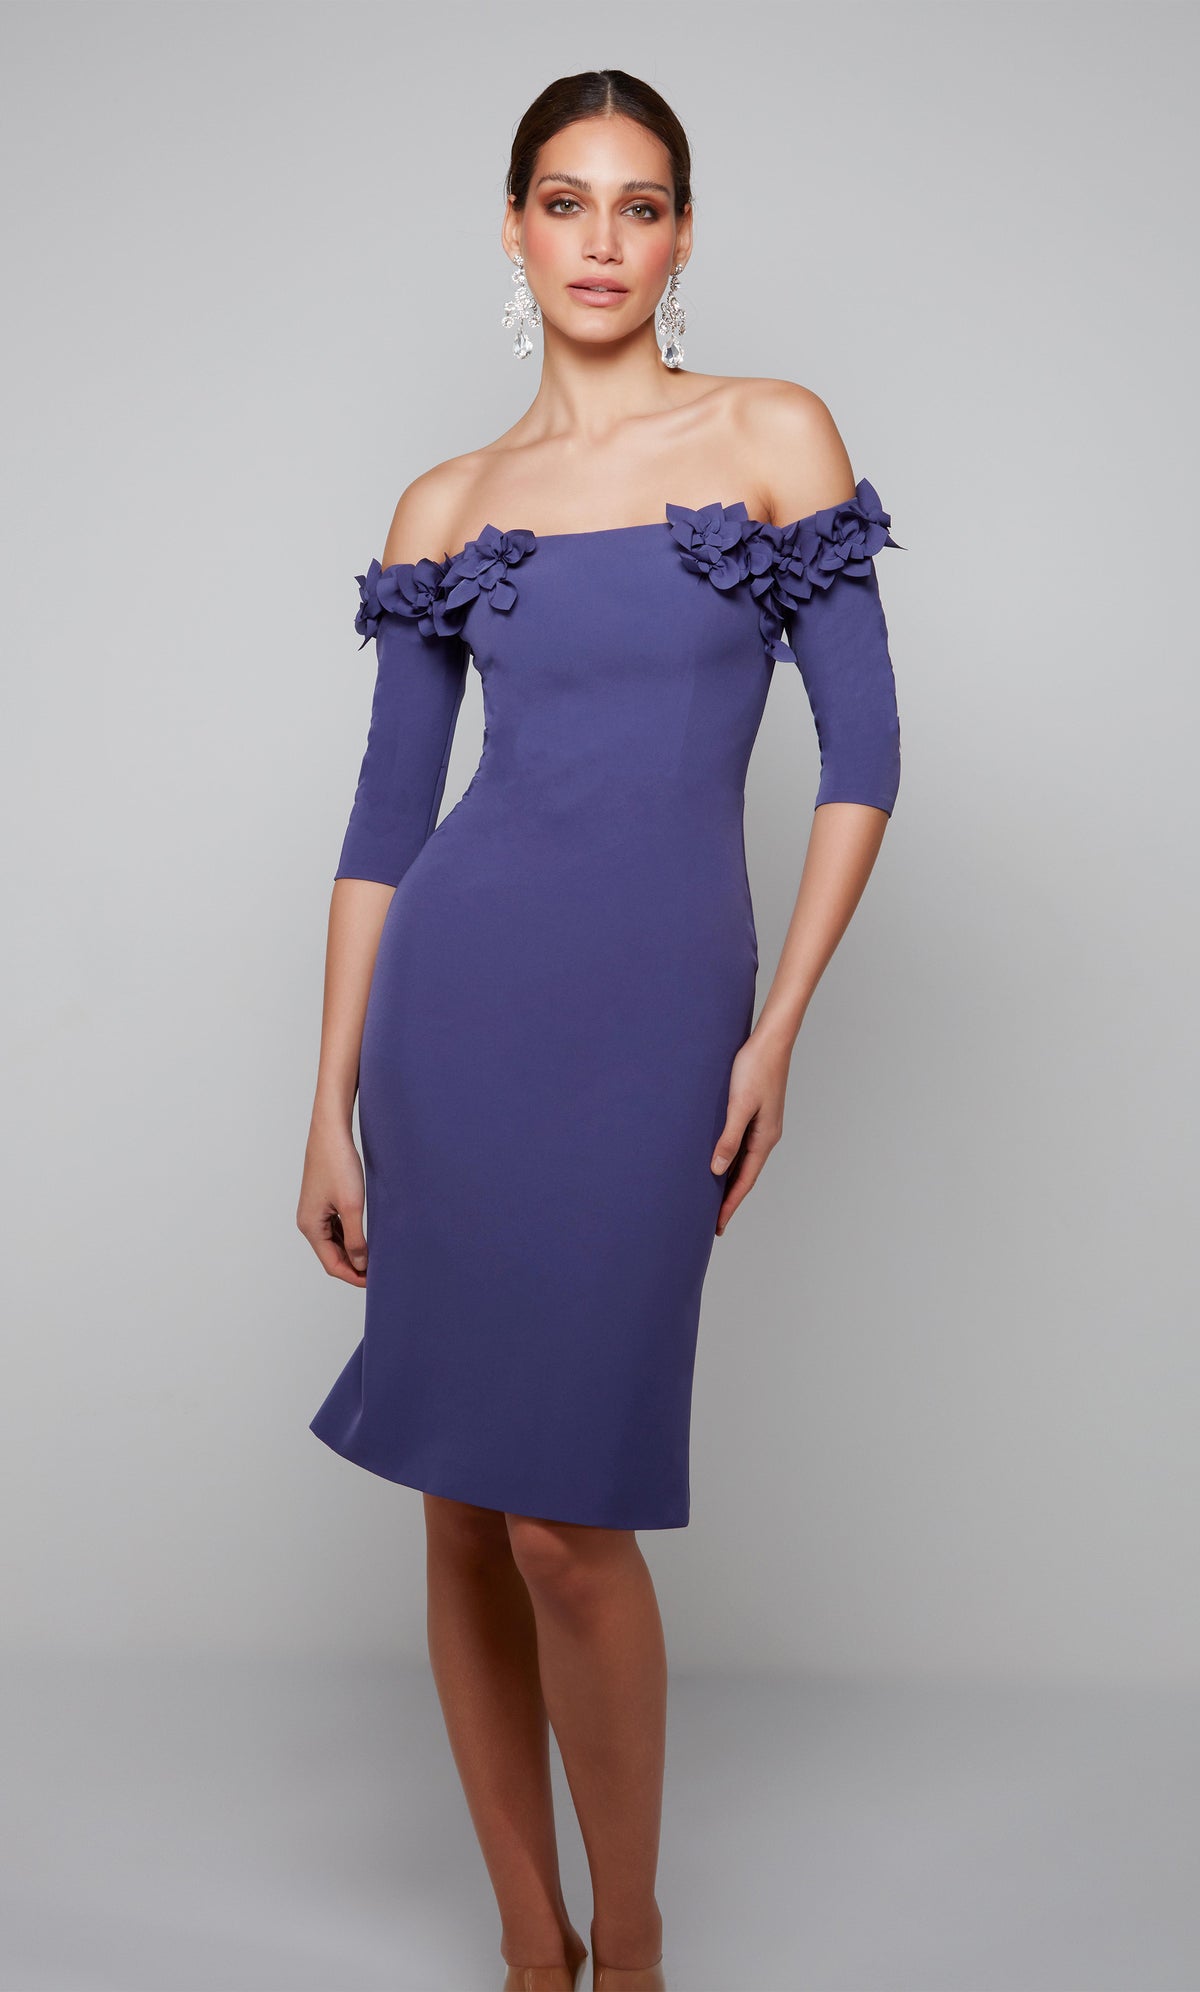 Purple engagement dress with an off the shoulder bodice enhanced with an airy flower volant.